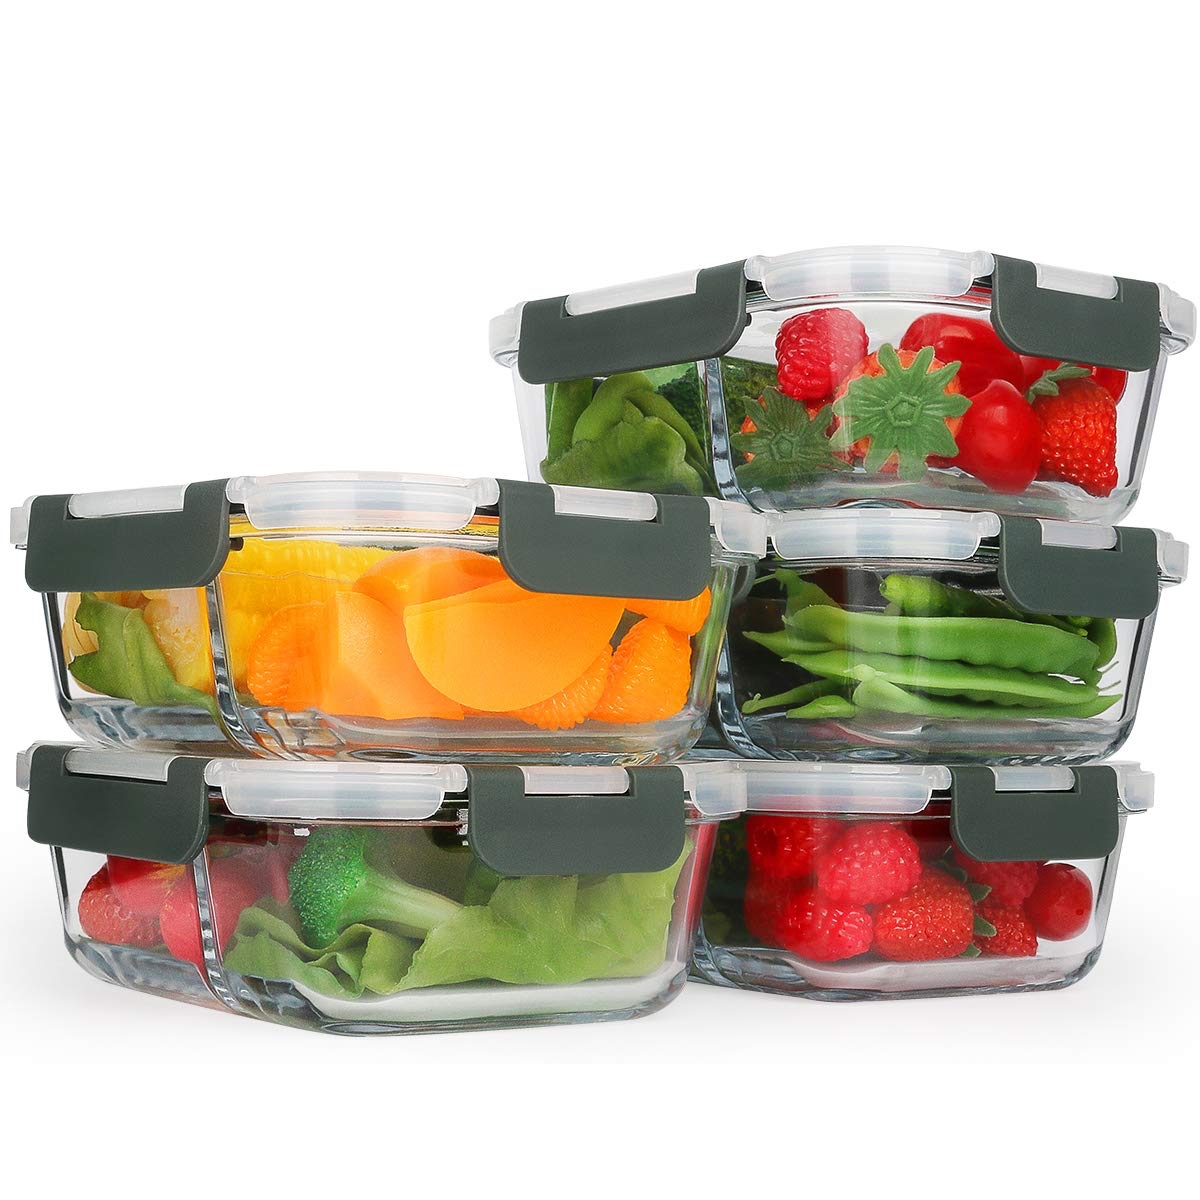 glass containers full of fruit and vegetables, cheap meal prep containers